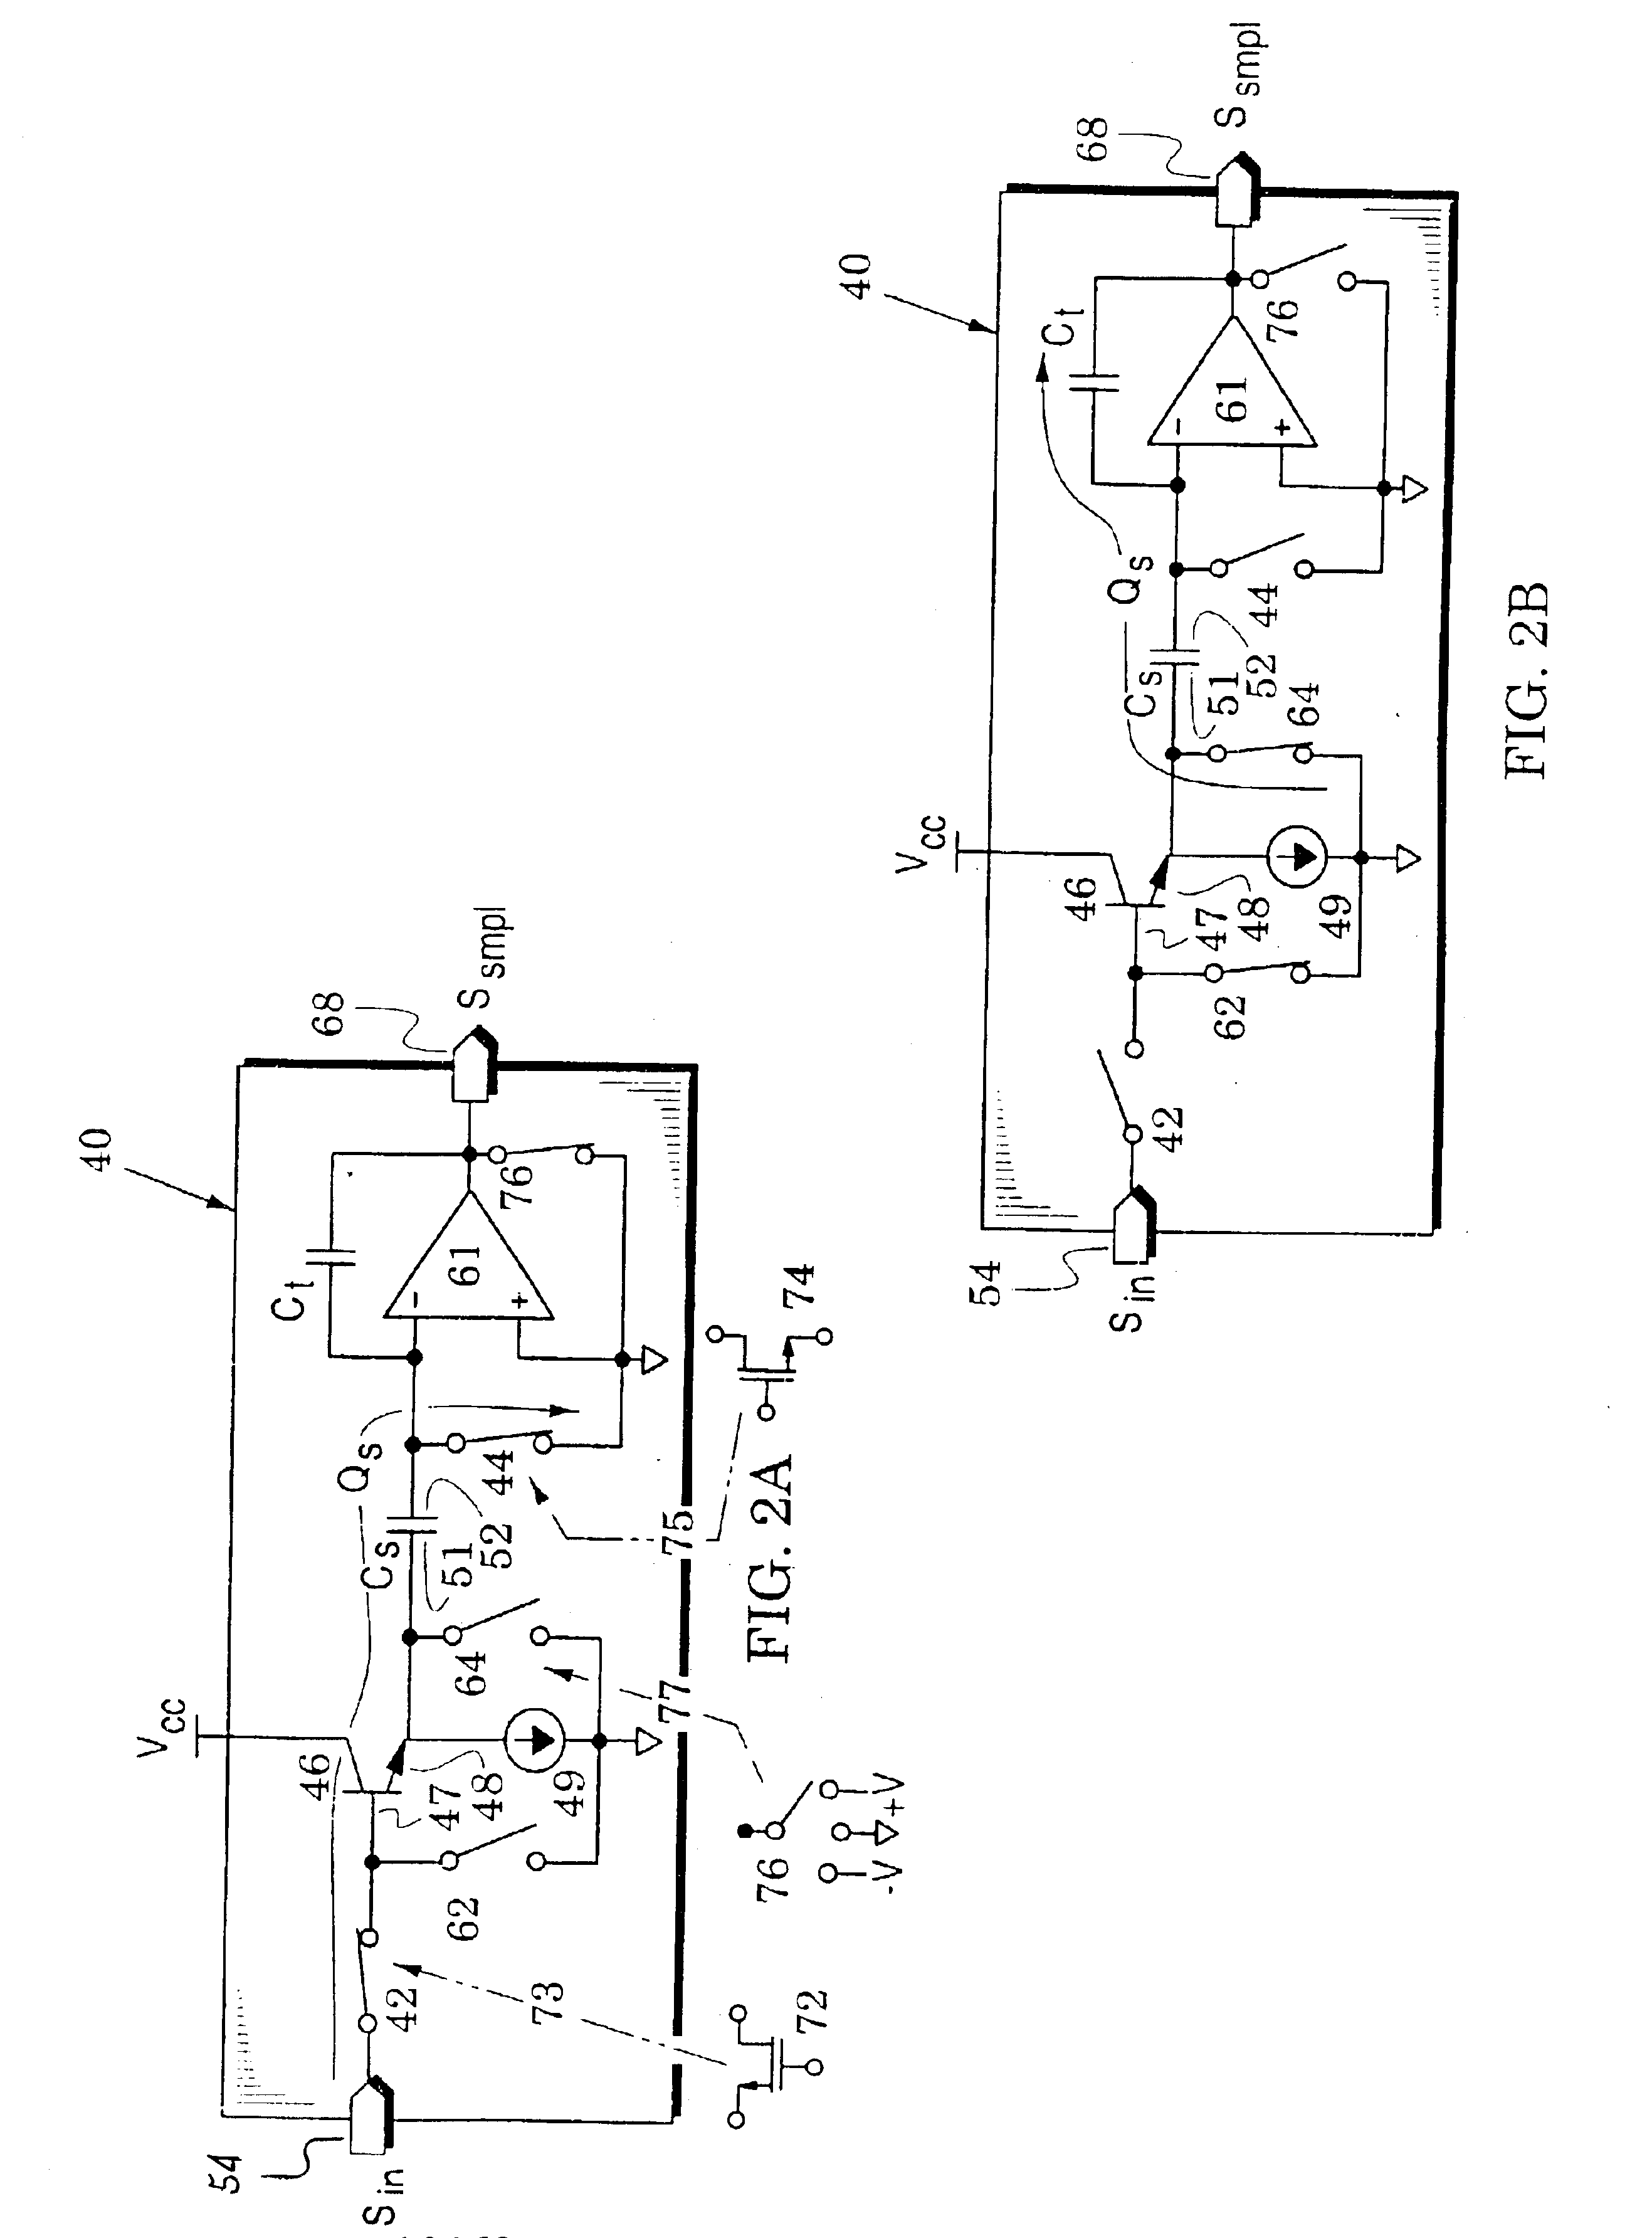 Switched-capacitor structures with enhanced isolation